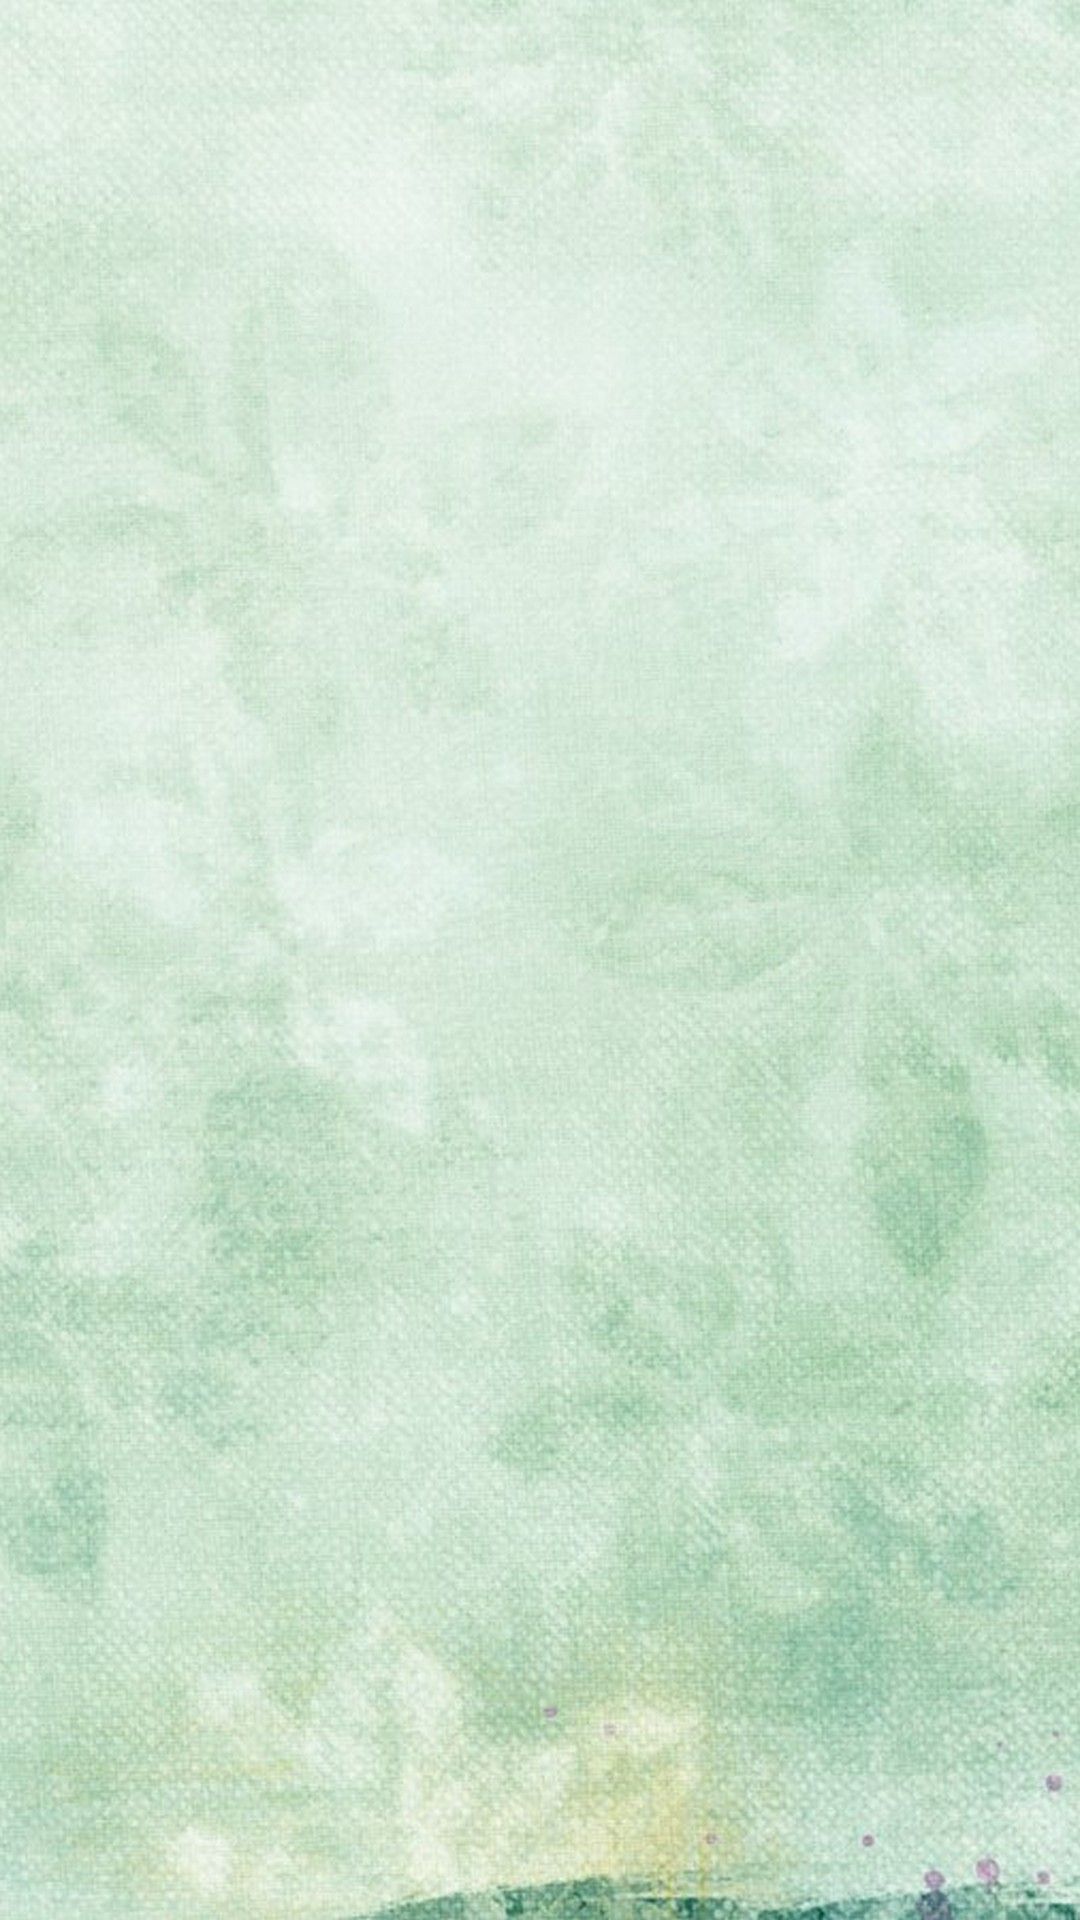 Green And Gold Phone Wallpaper. Mint green wallpaper iphone, Mint green background, Floral wallpaper iphone